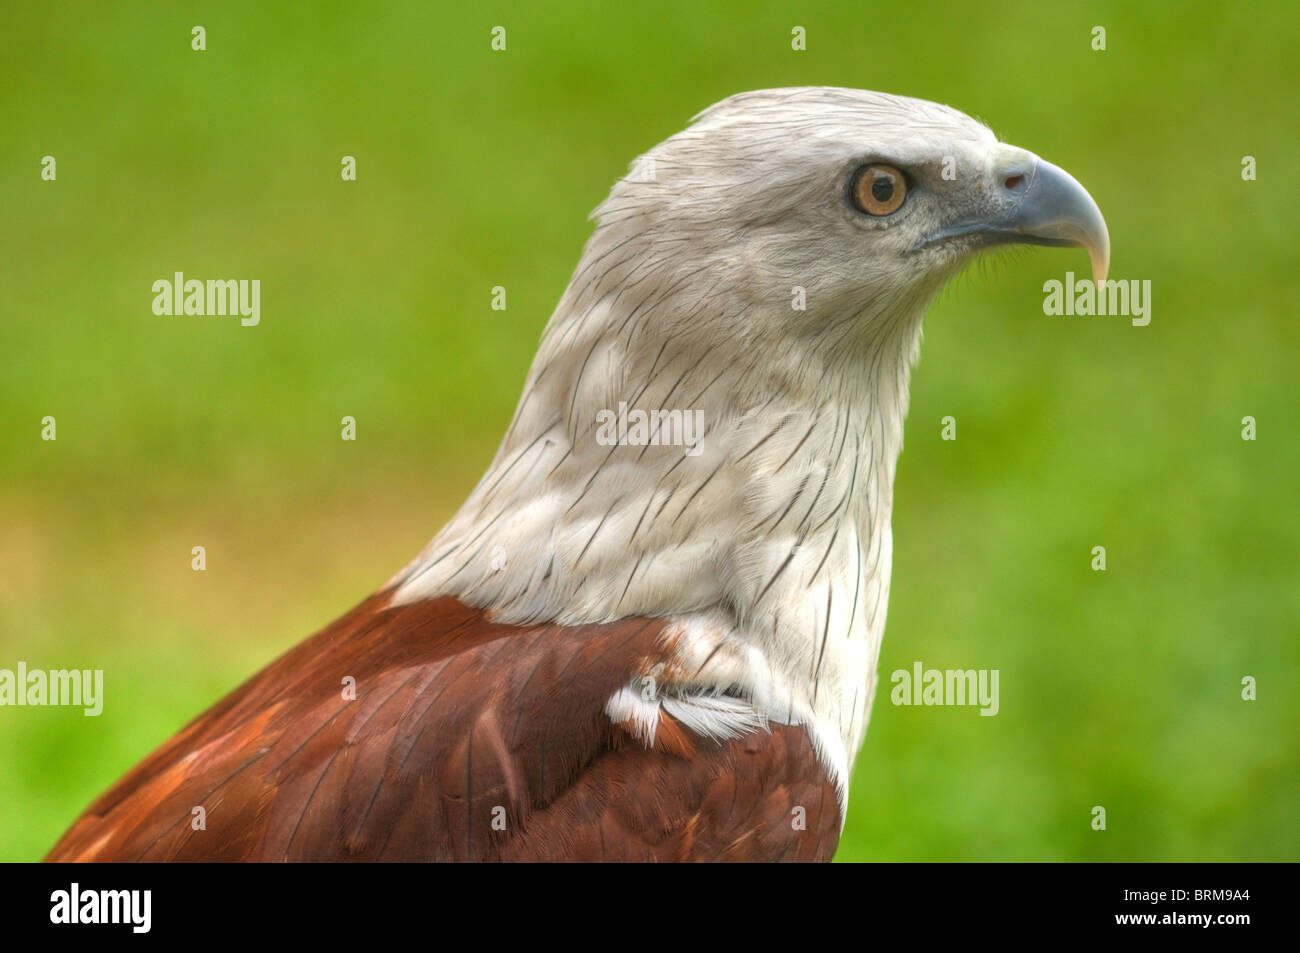 A close-up picture of a full grown Brahminy Kite. Stock Photo